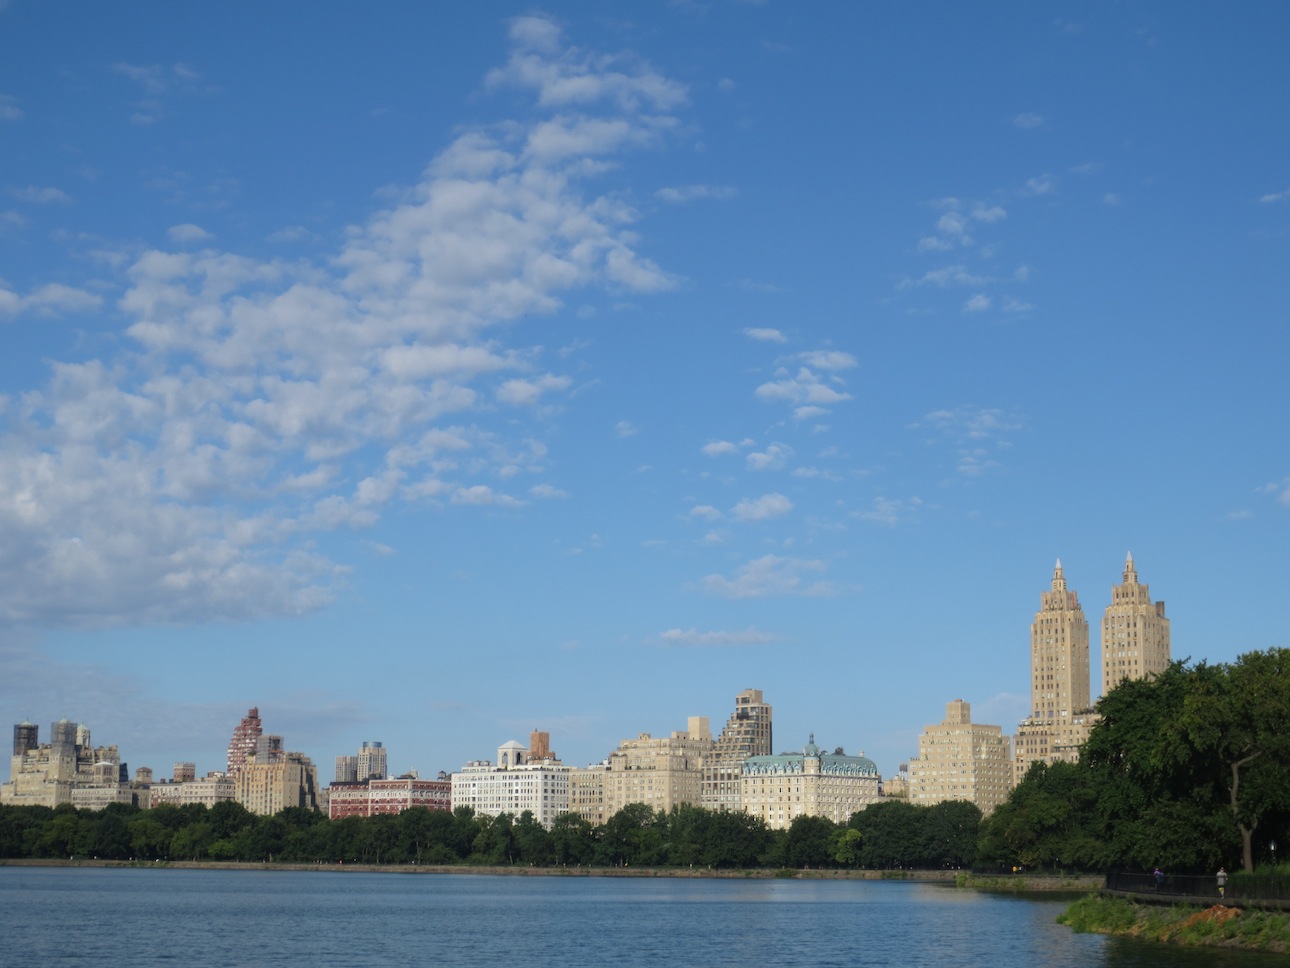 Another view of the NYC skyline from the Jacqueline Onassis Reservoir.